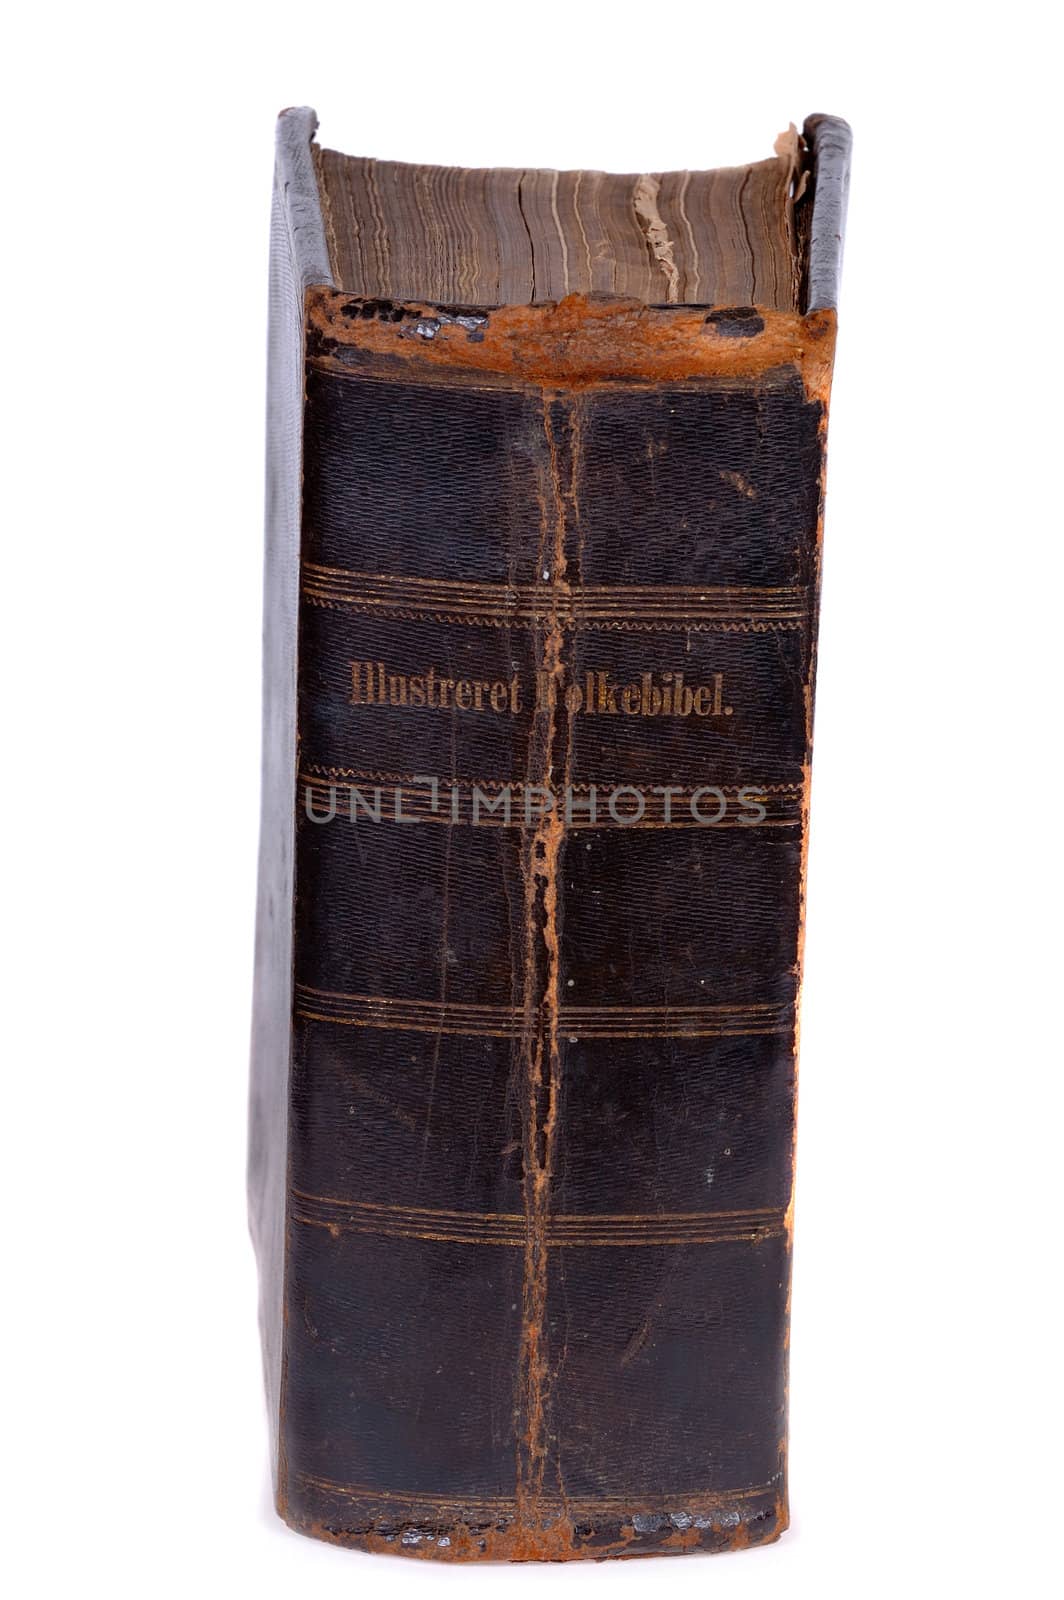 Old bible, over 100 years old, taken on clean white background. On the back it is written: Ilustrated peopels bible.